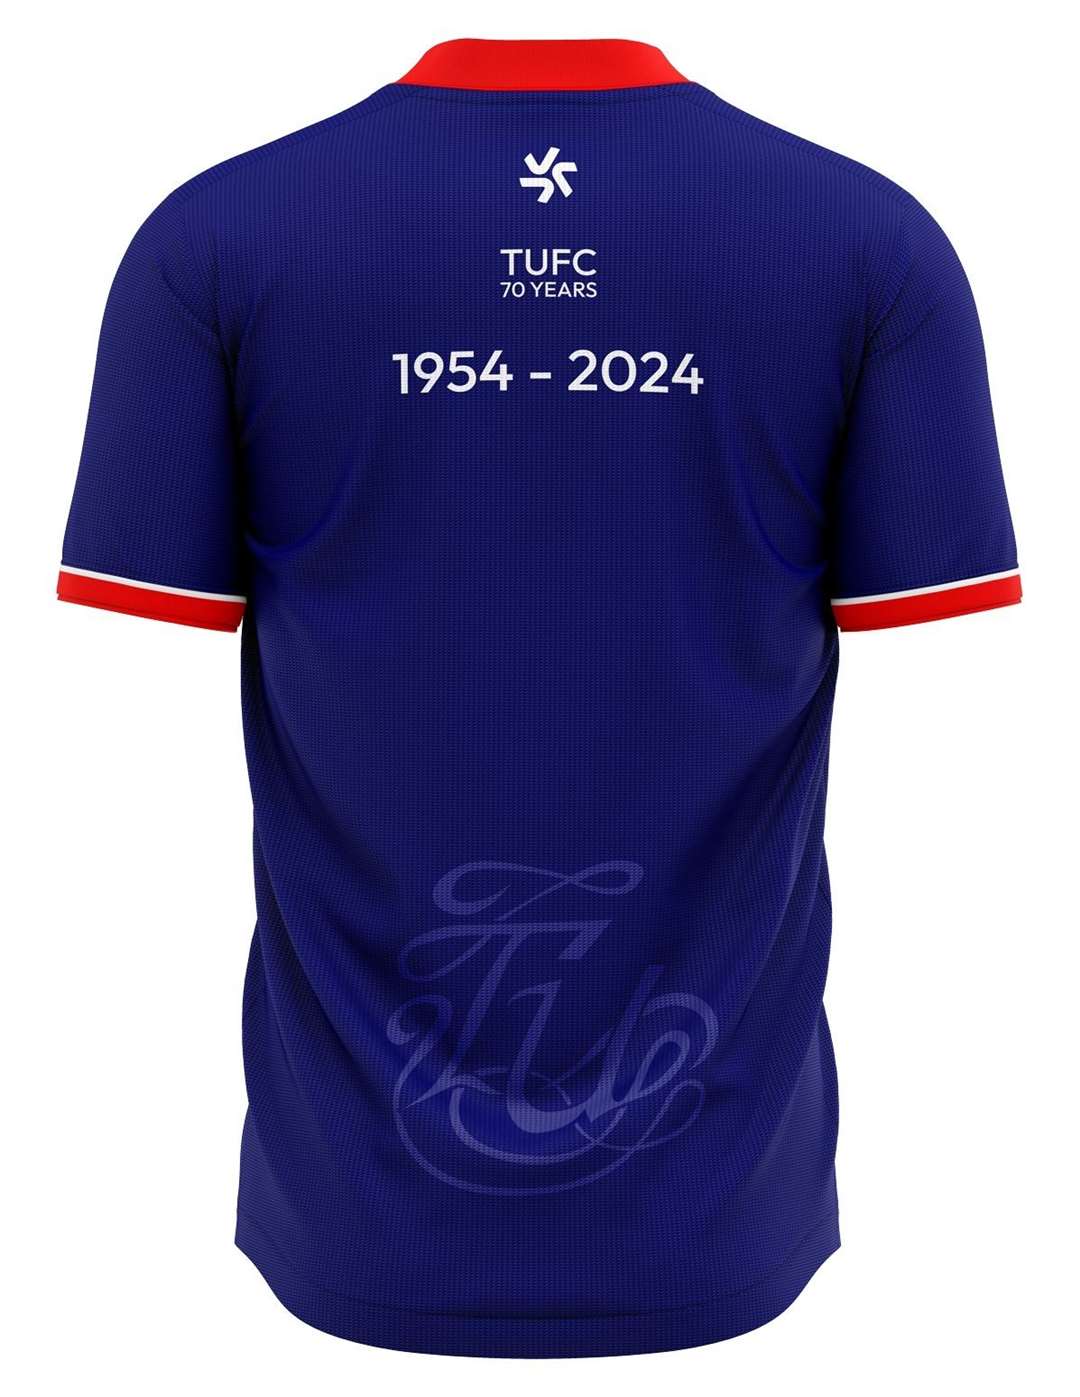 Turriff United have unveiled a special shirt to commemorate their 70th anniversary